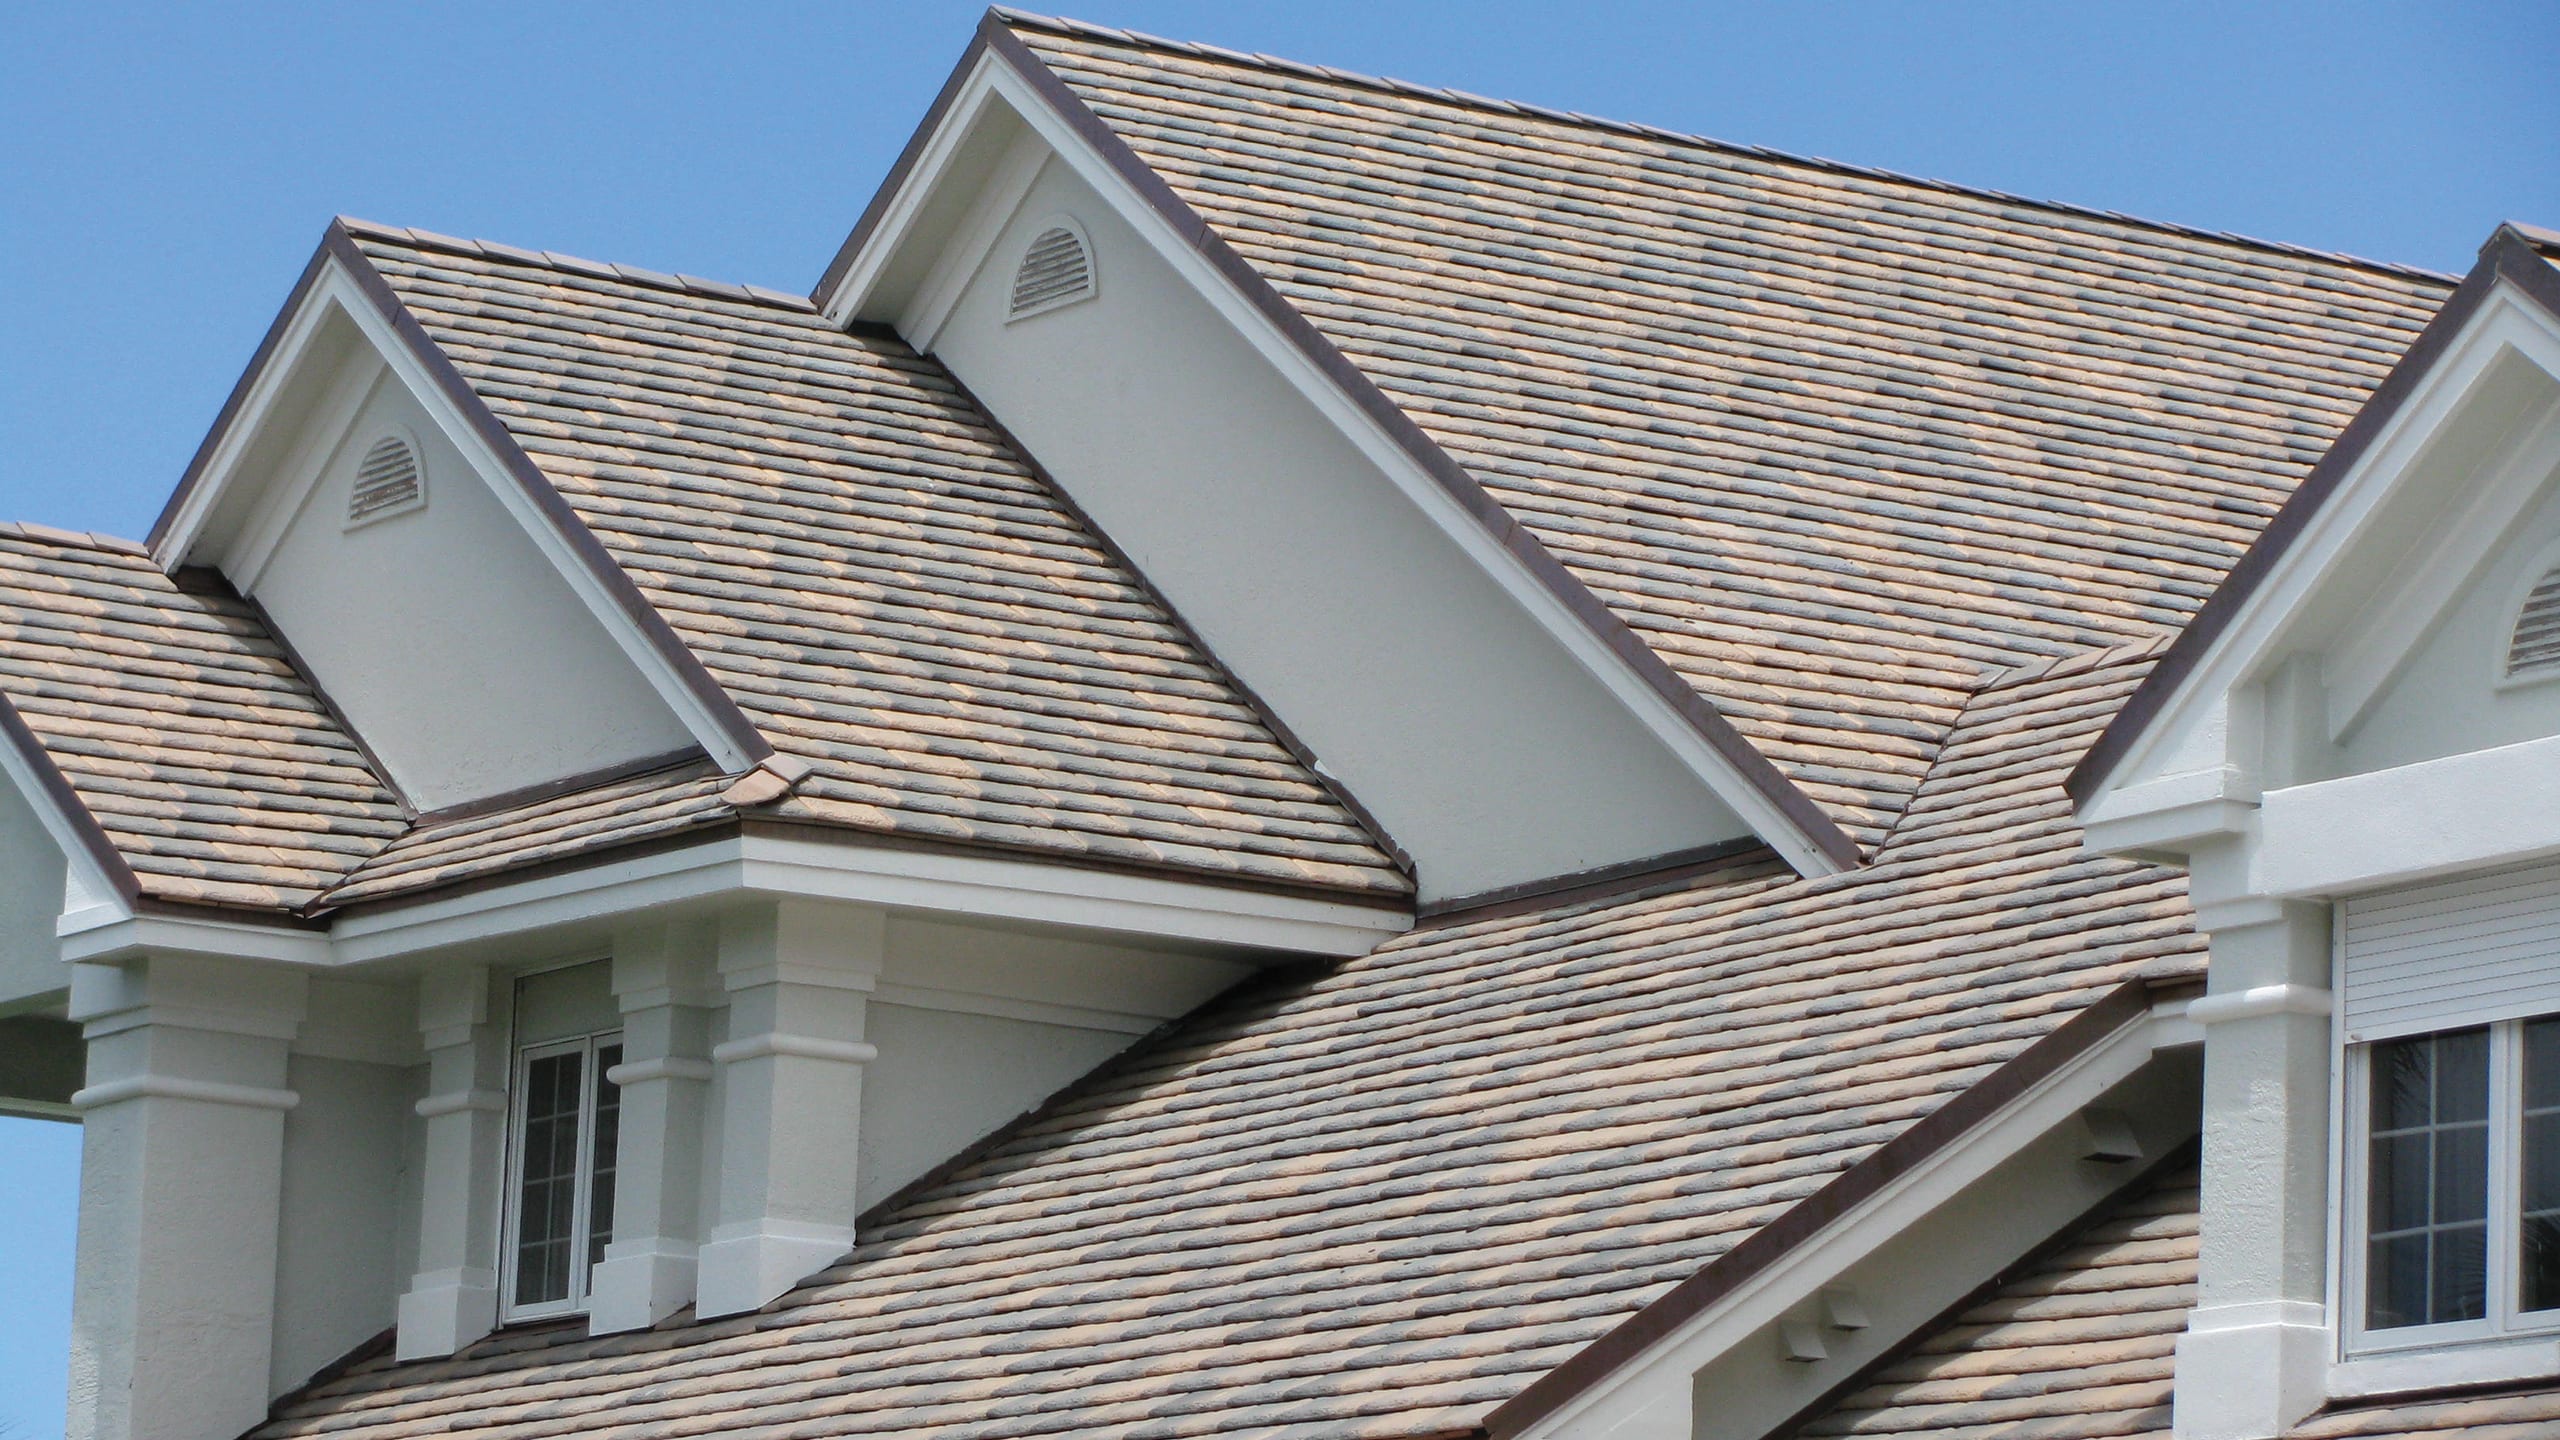 Private Residence - Naples Featuring Ludowici Slate Clay Roof Tile